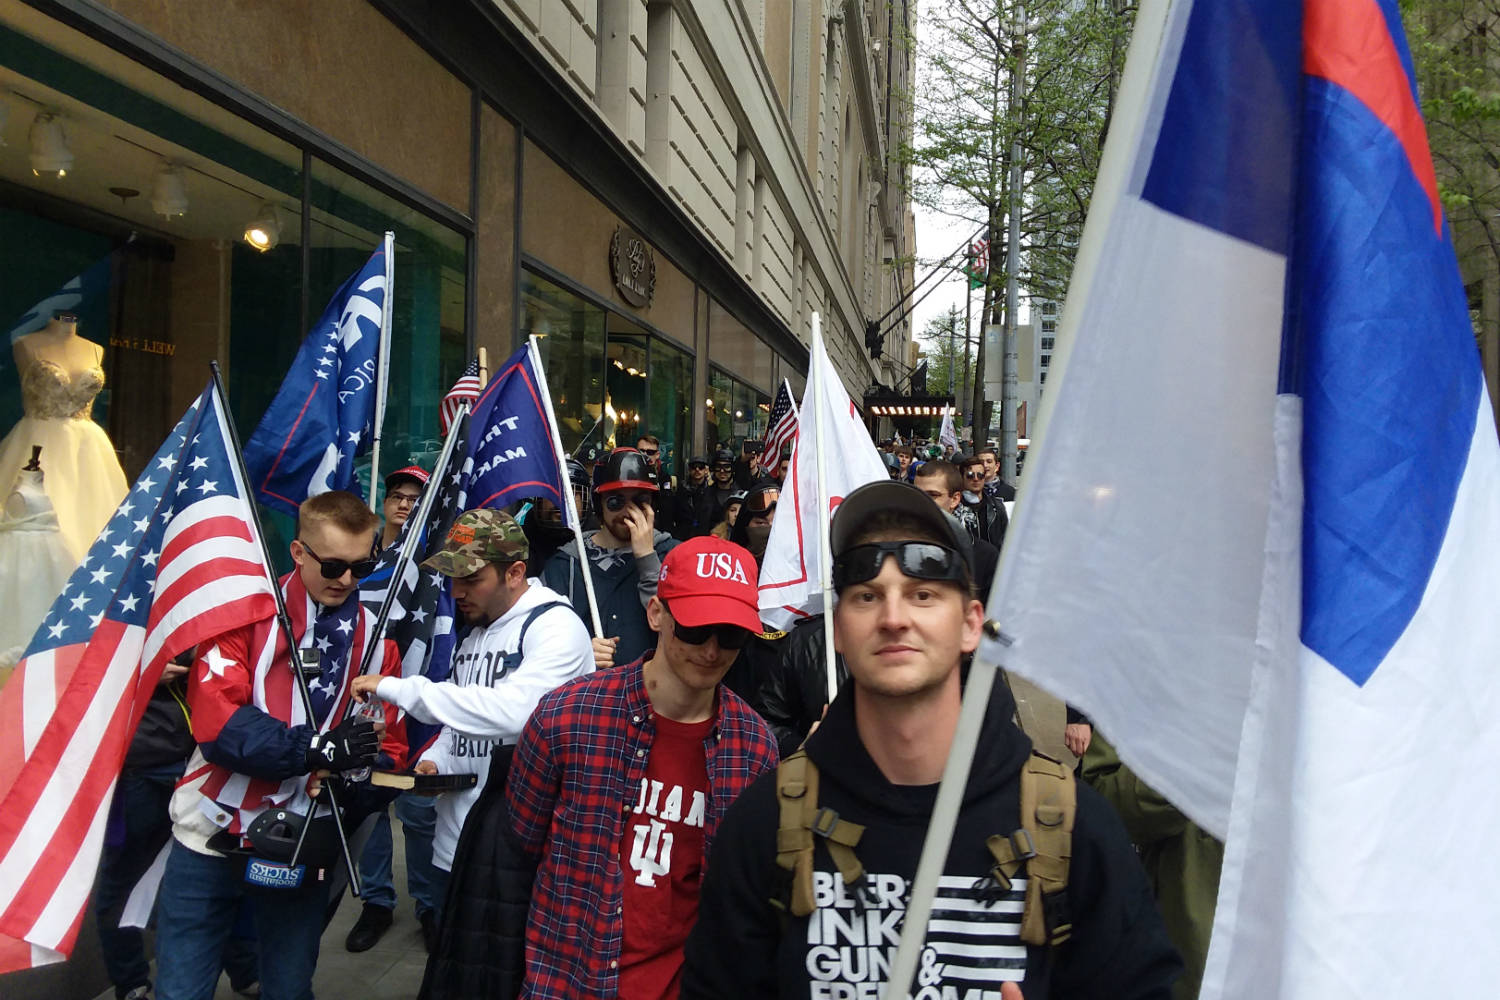 Trump supporters marching through Seattle on May 1, 2017. Photo by Casey Jaywork